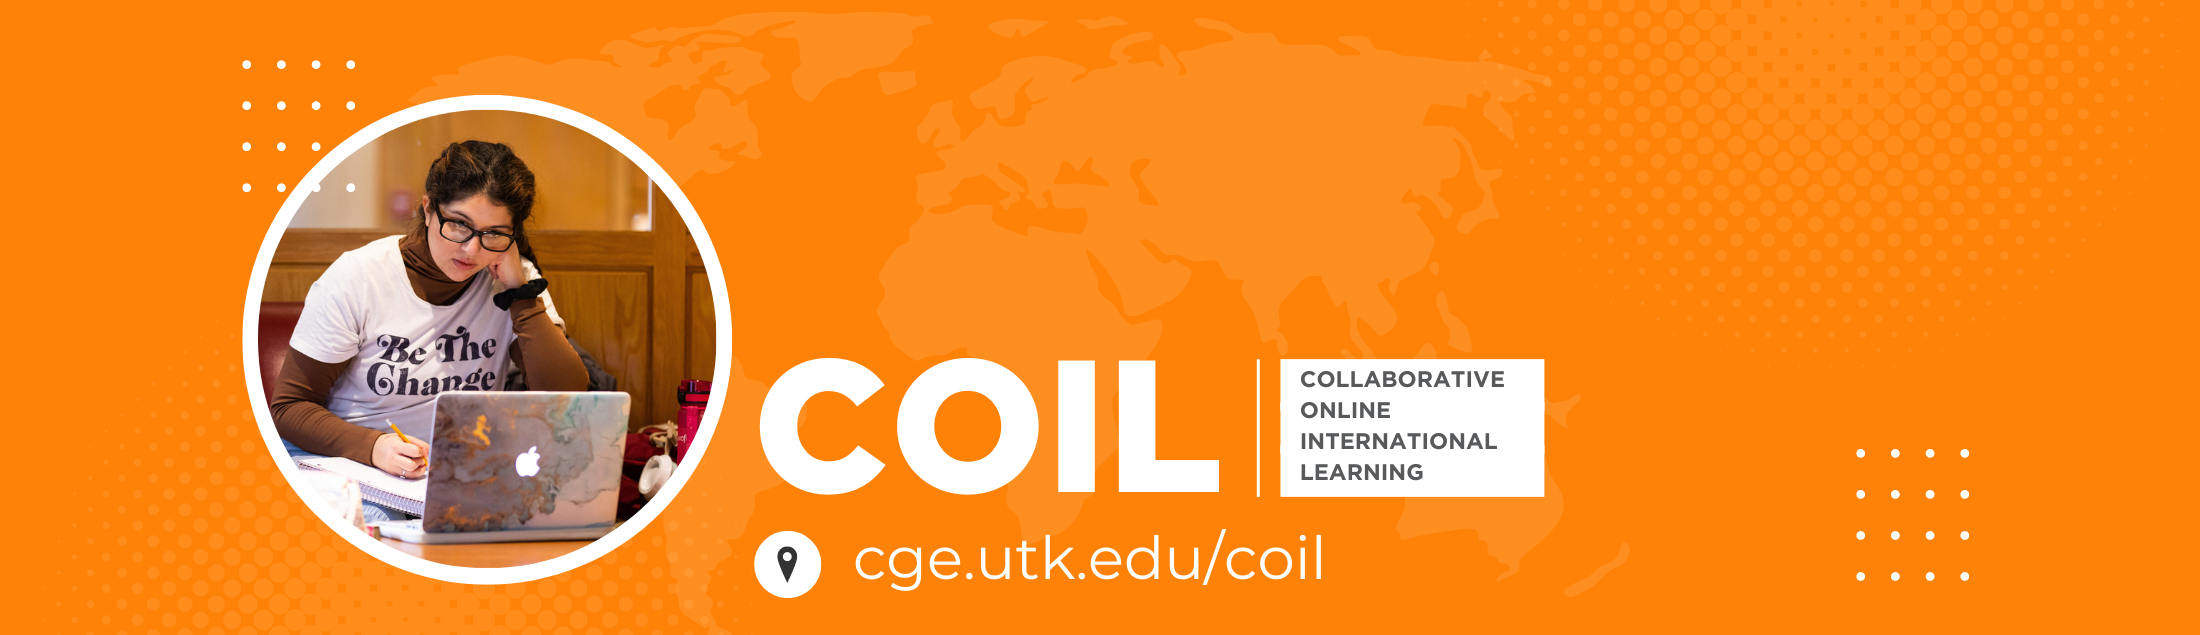 Collaborative Online International Learning (COIL)